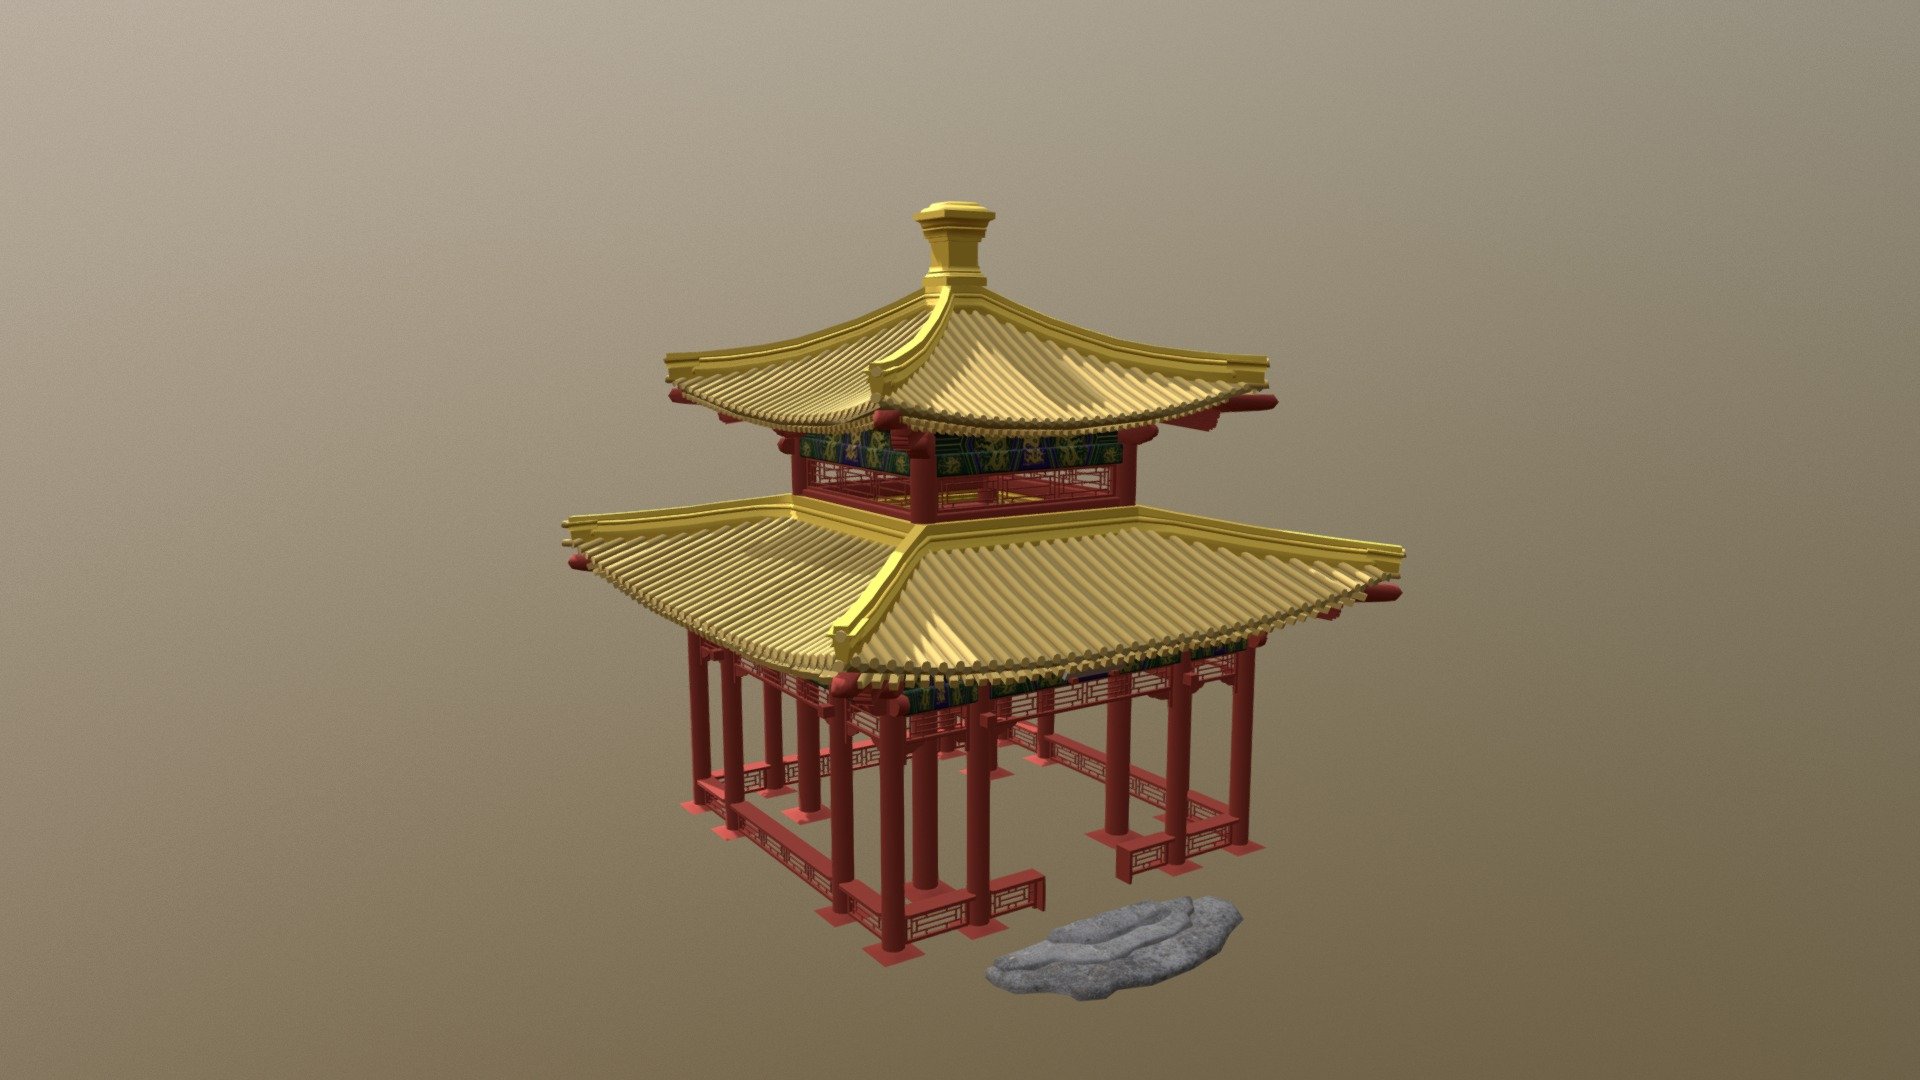 Asset for the Augmented Reality Project - Chinese Palace - 3D model by Jixuan S (@jixuan) 3d model